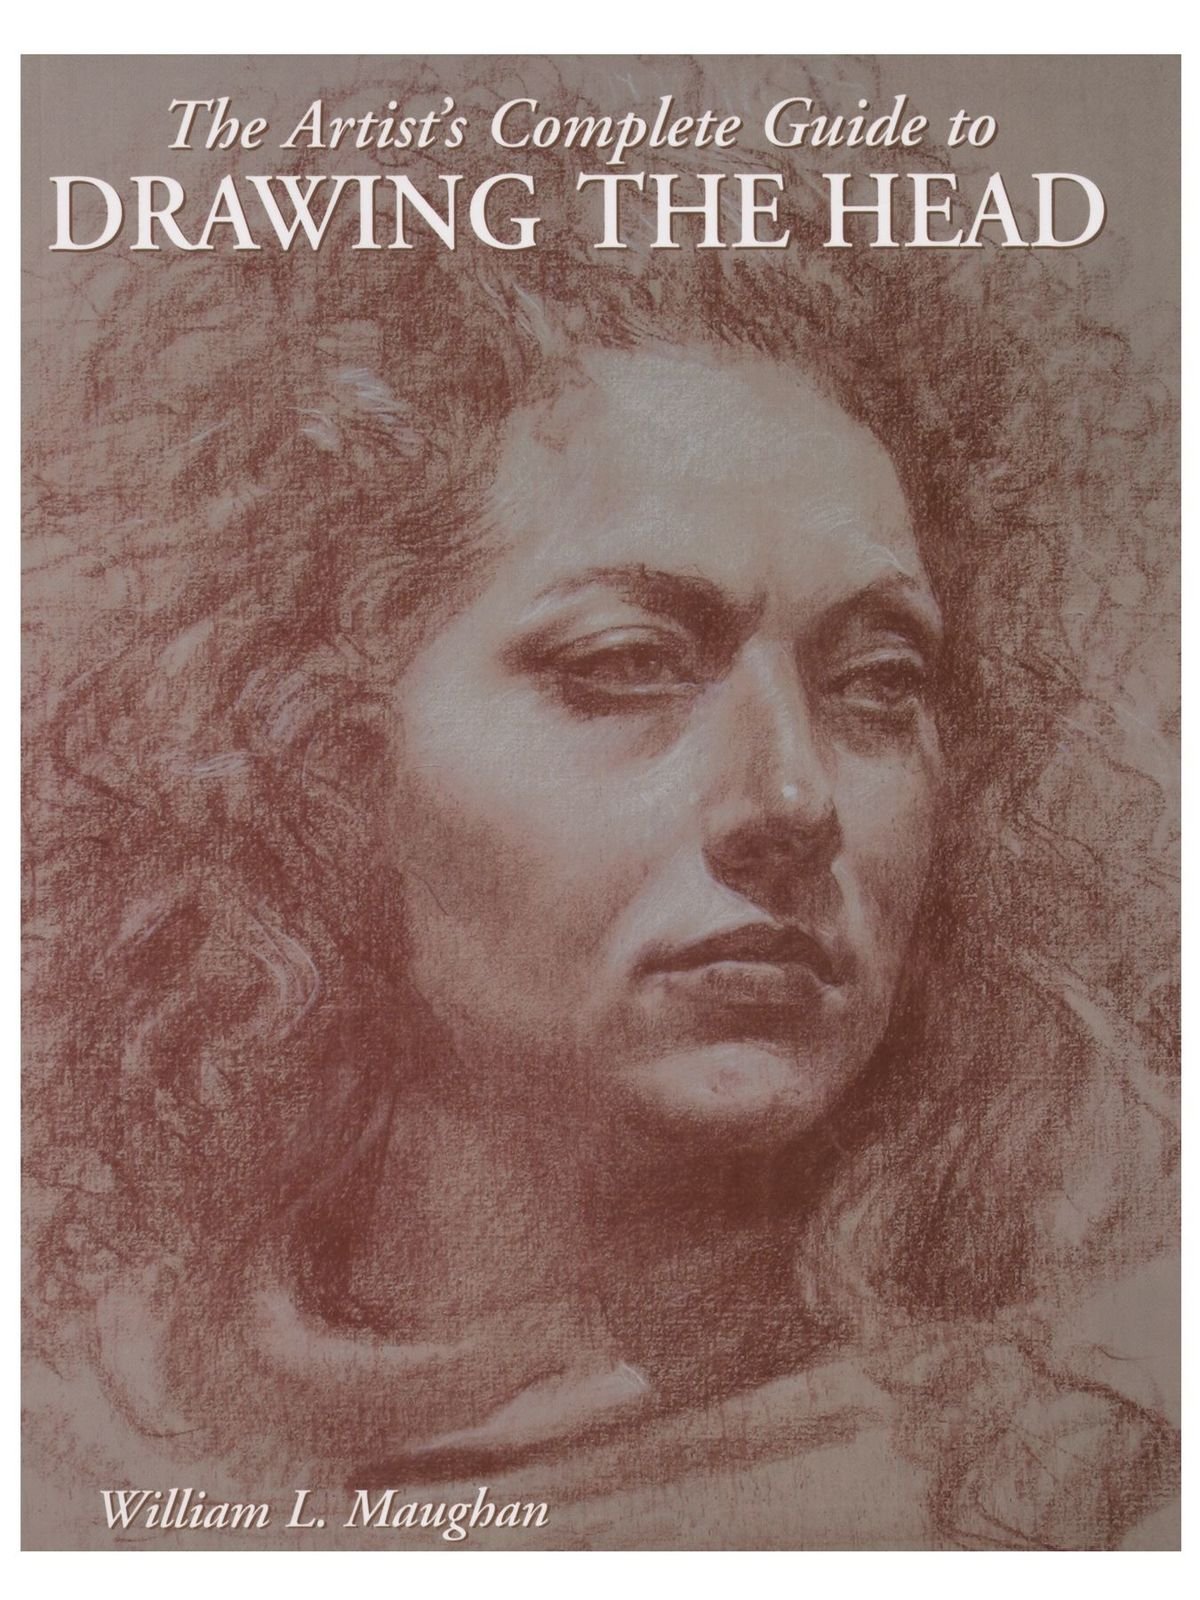 Watson-Guptill - The Artist's Complete Guide to Drawing the Head